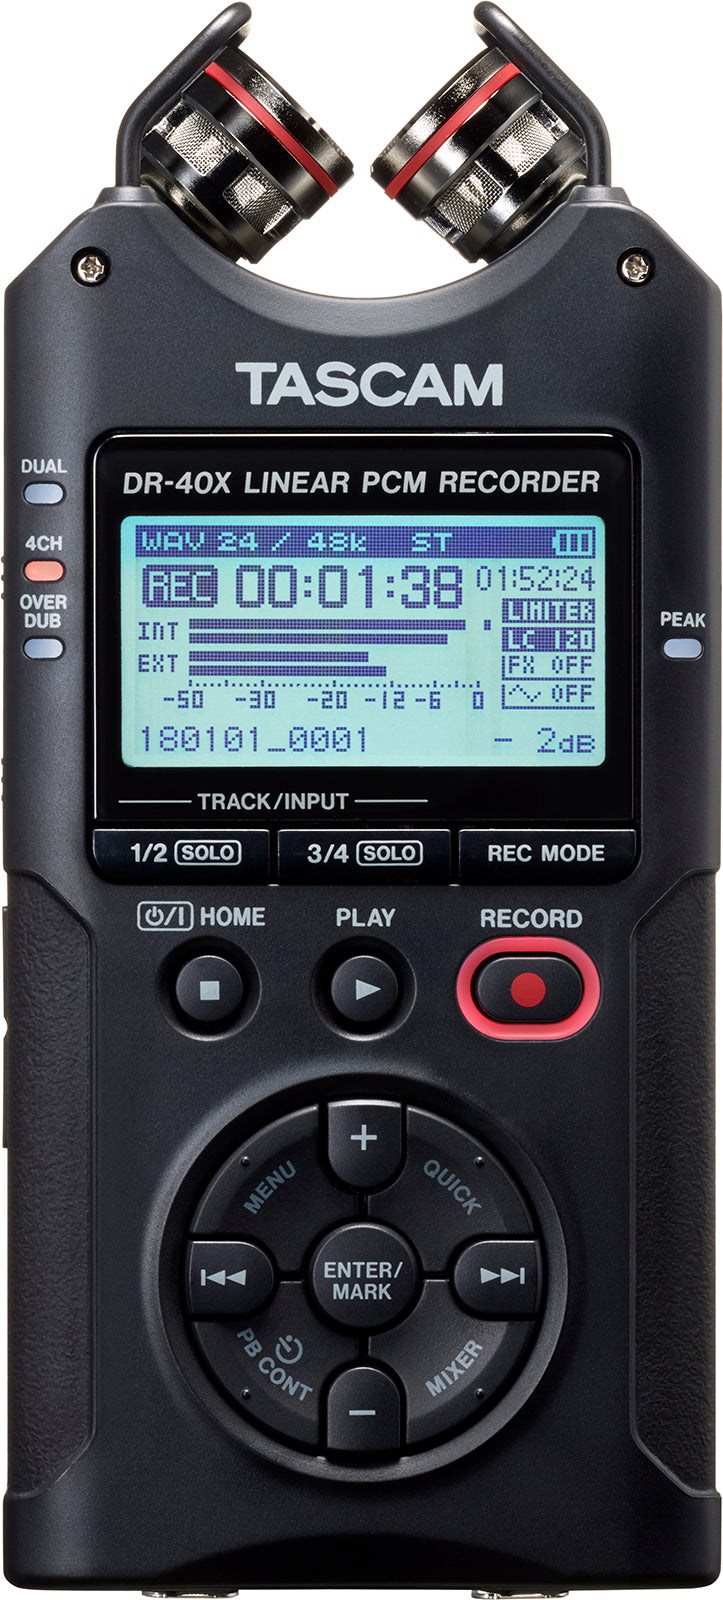 TASCAM DR-40X4 Channel Linear PCM Recorder with free Case